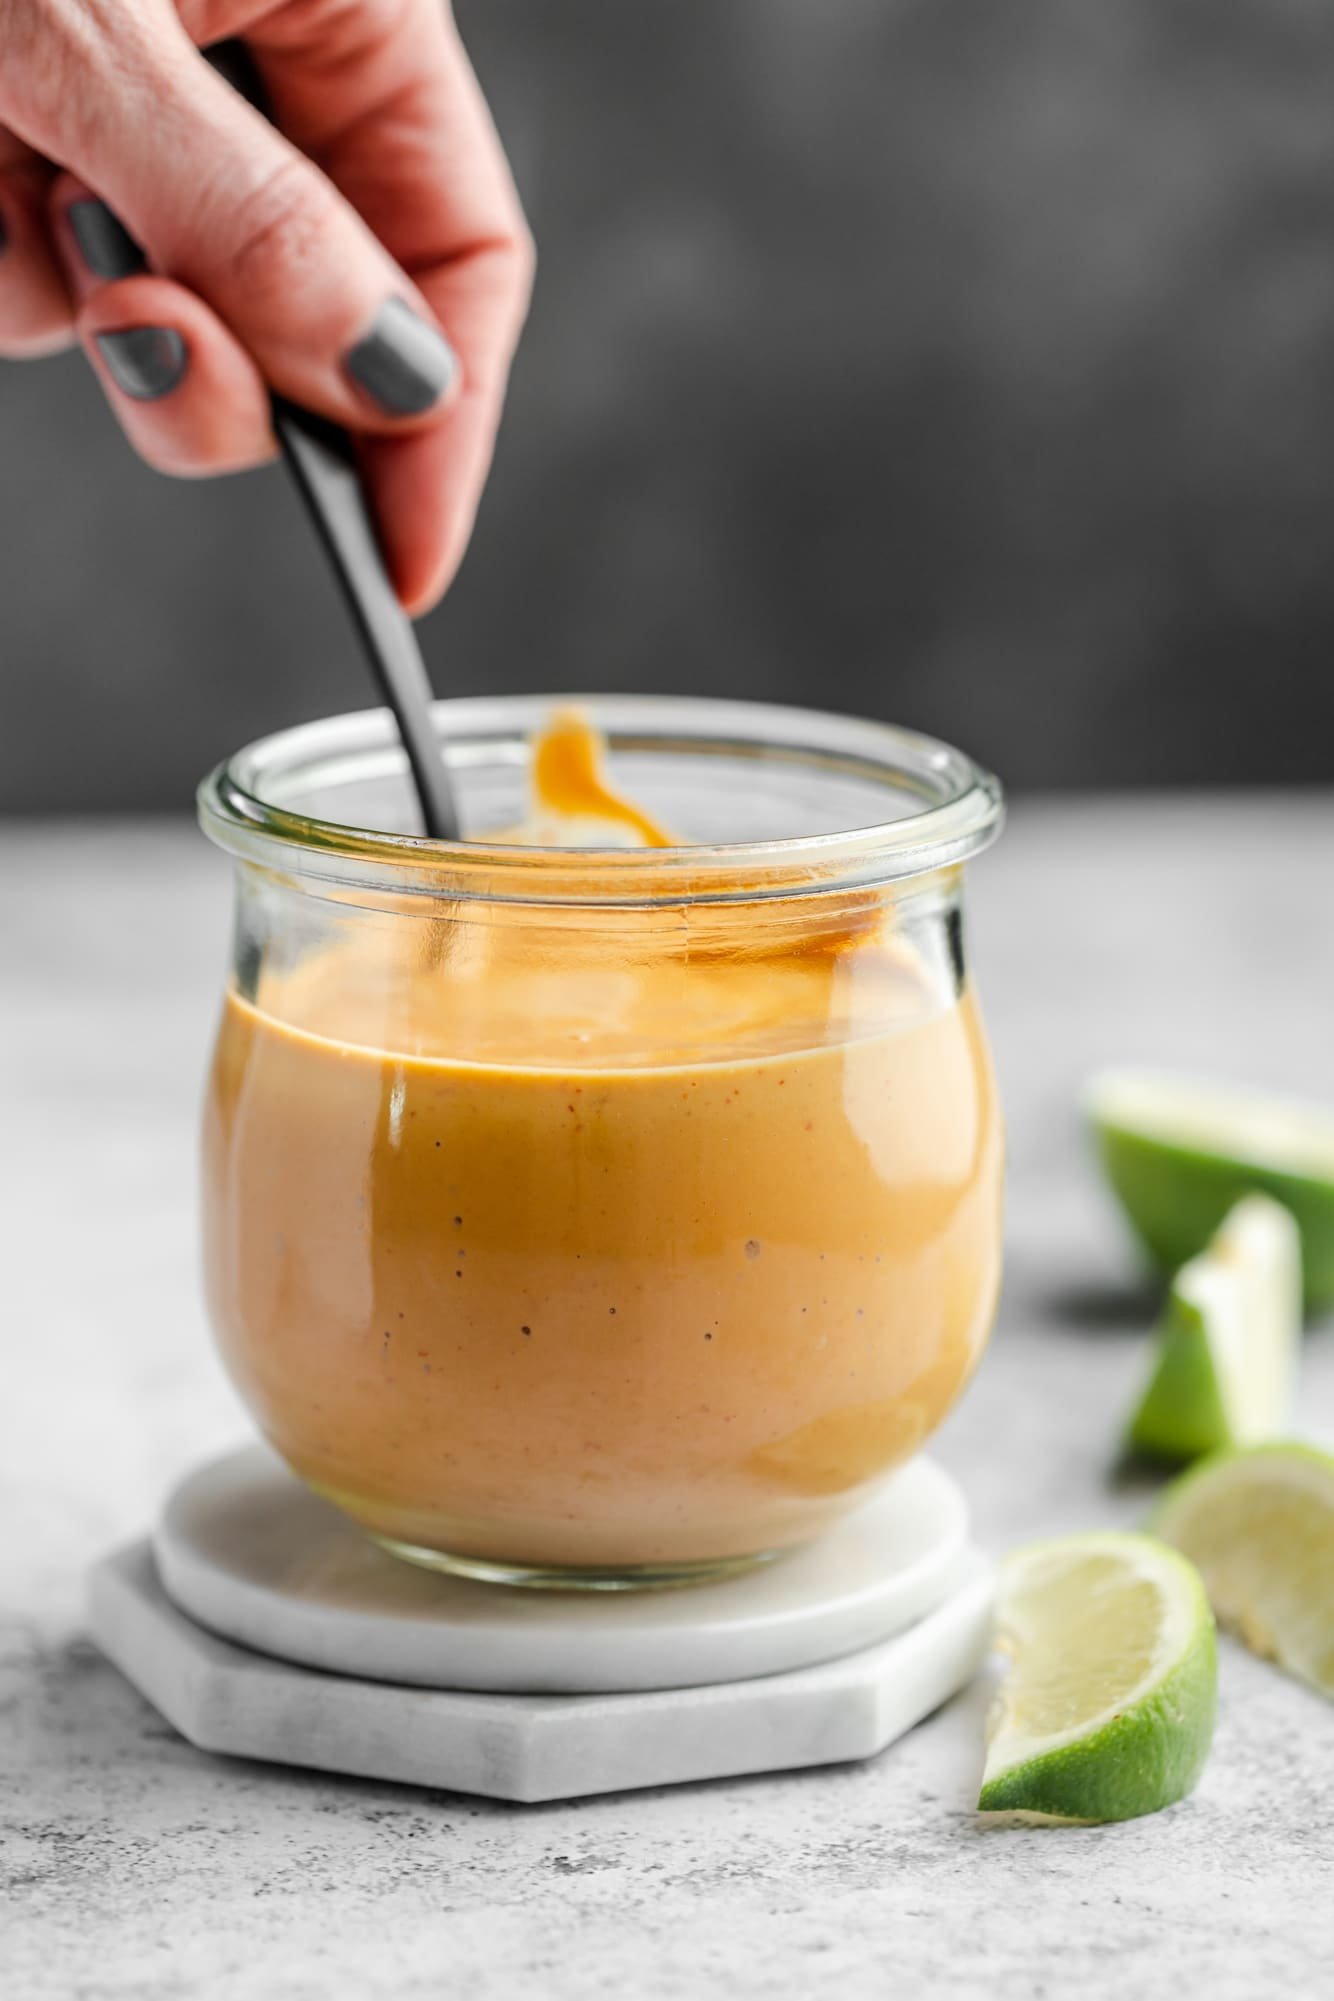 Women holding a spoon in a jar of orange chipotle sauce.